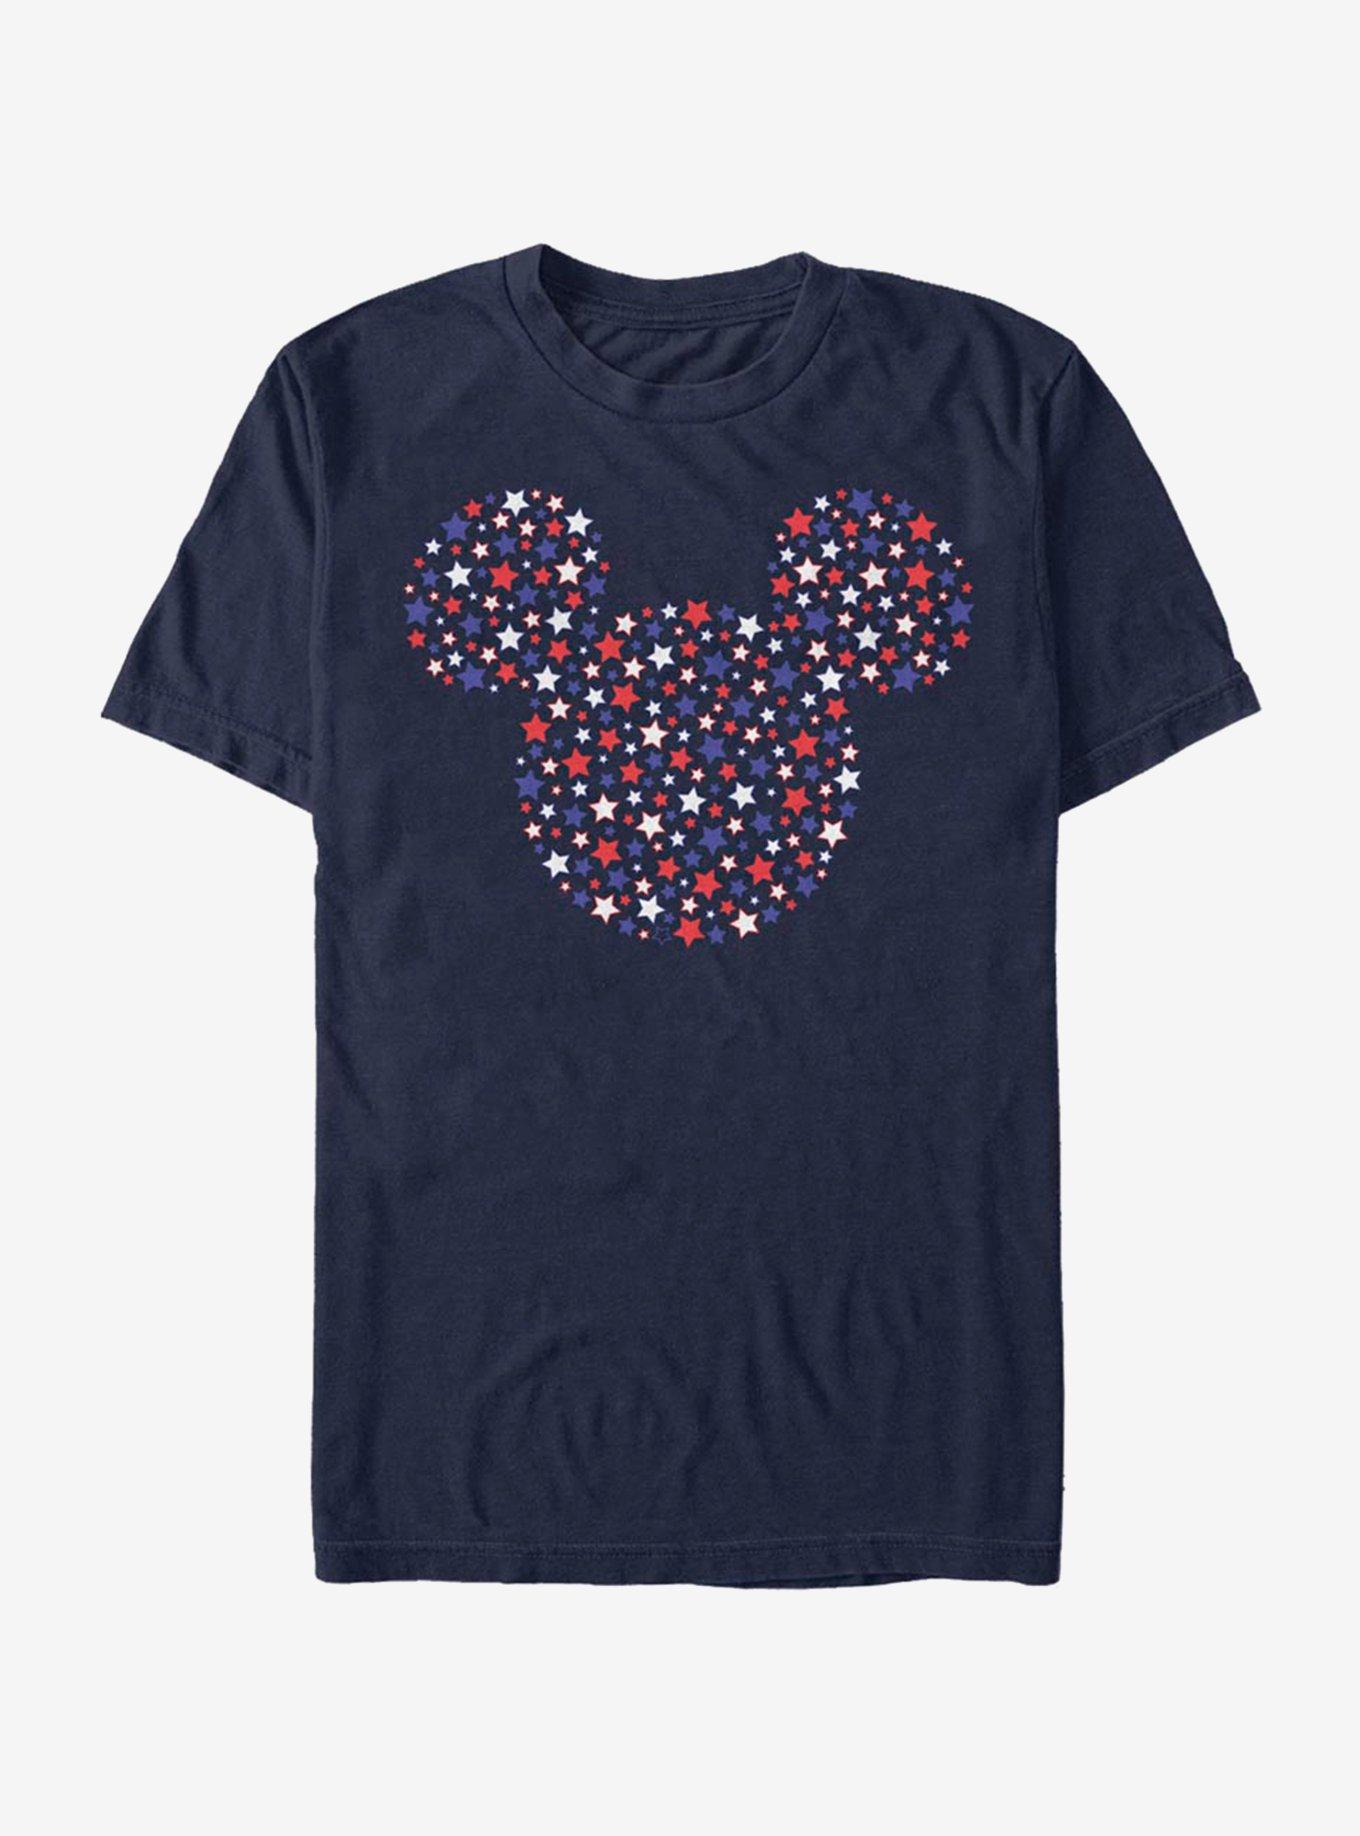 Disney Mickey Mouse Stars And Ears T-Shirt, NAVY, hi-res